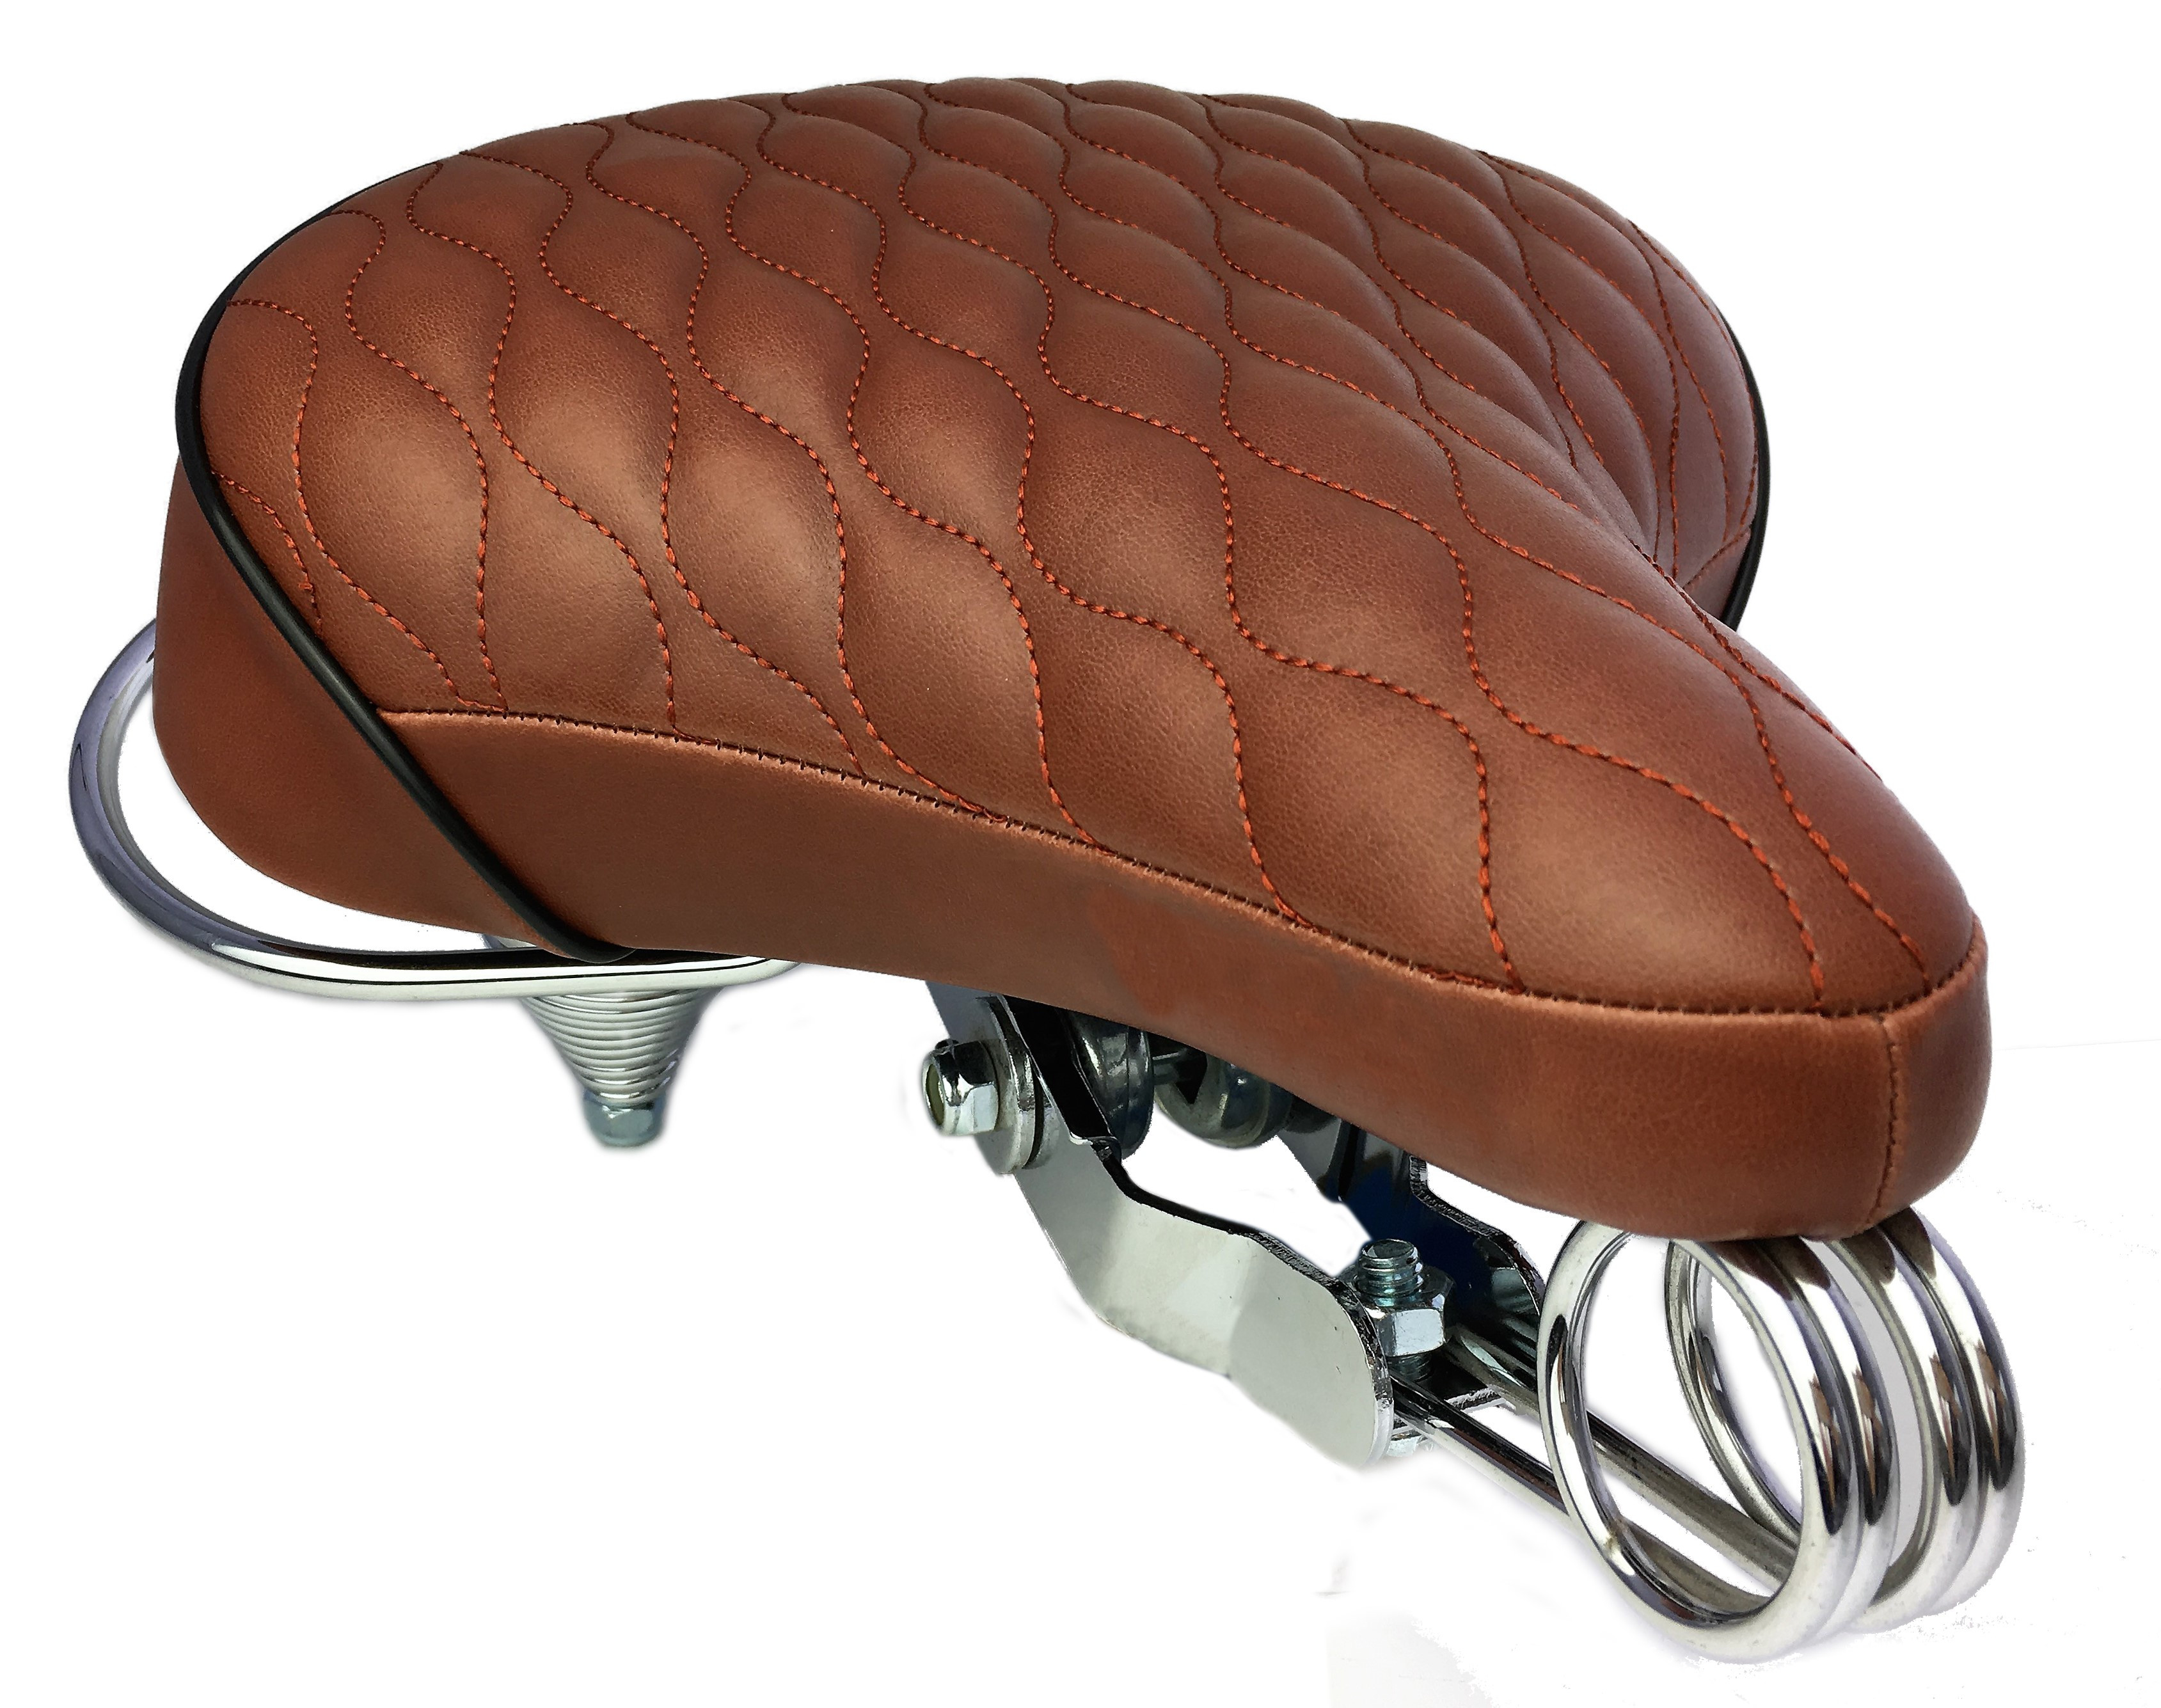 Cruiser Saddle, quilted brown